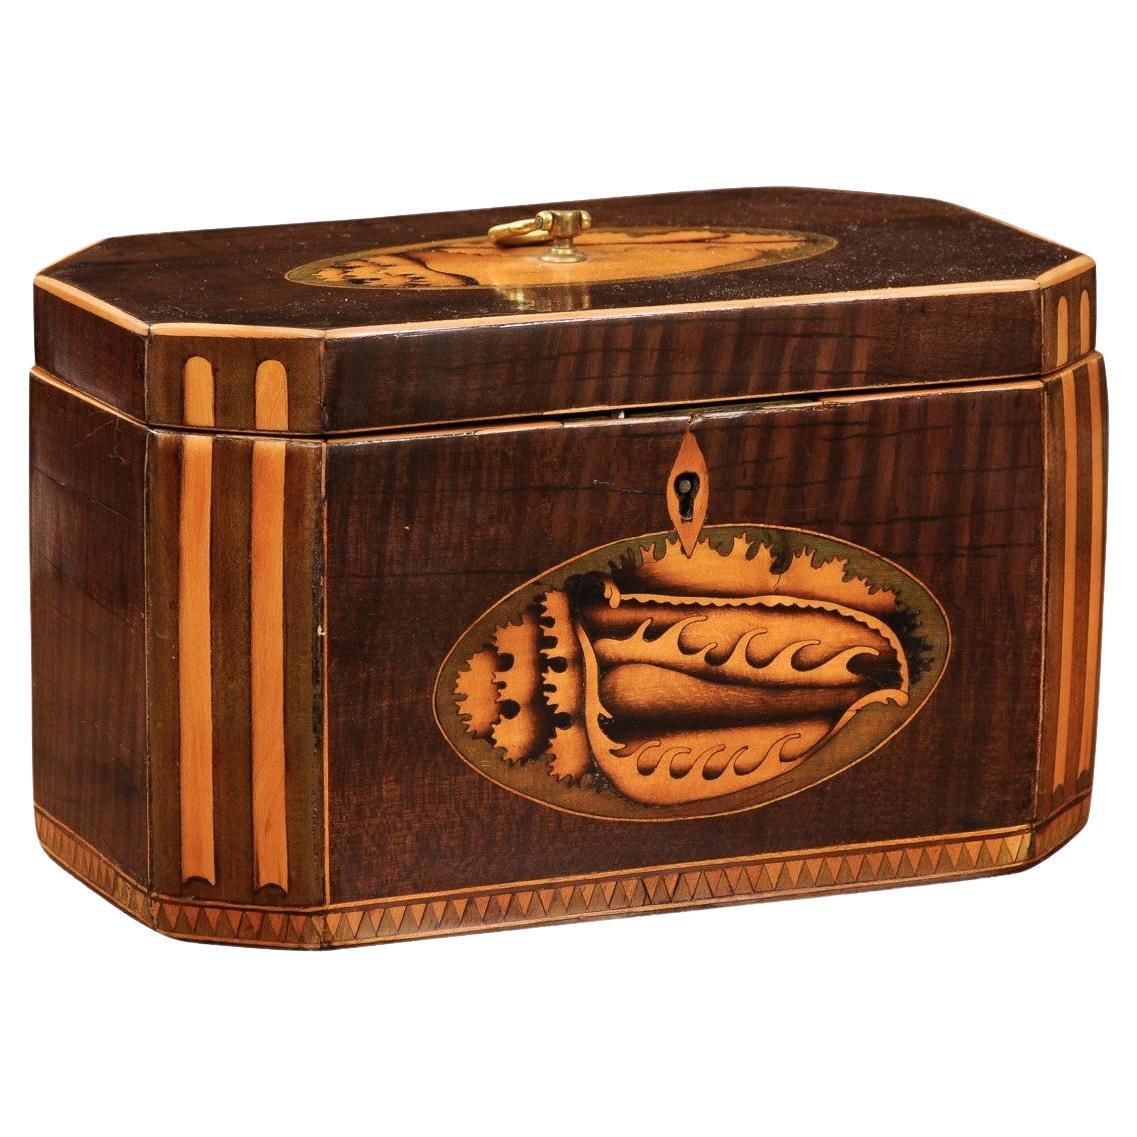 Early 19th Century English George III Tea Caddy with Shell Inlay For Sale